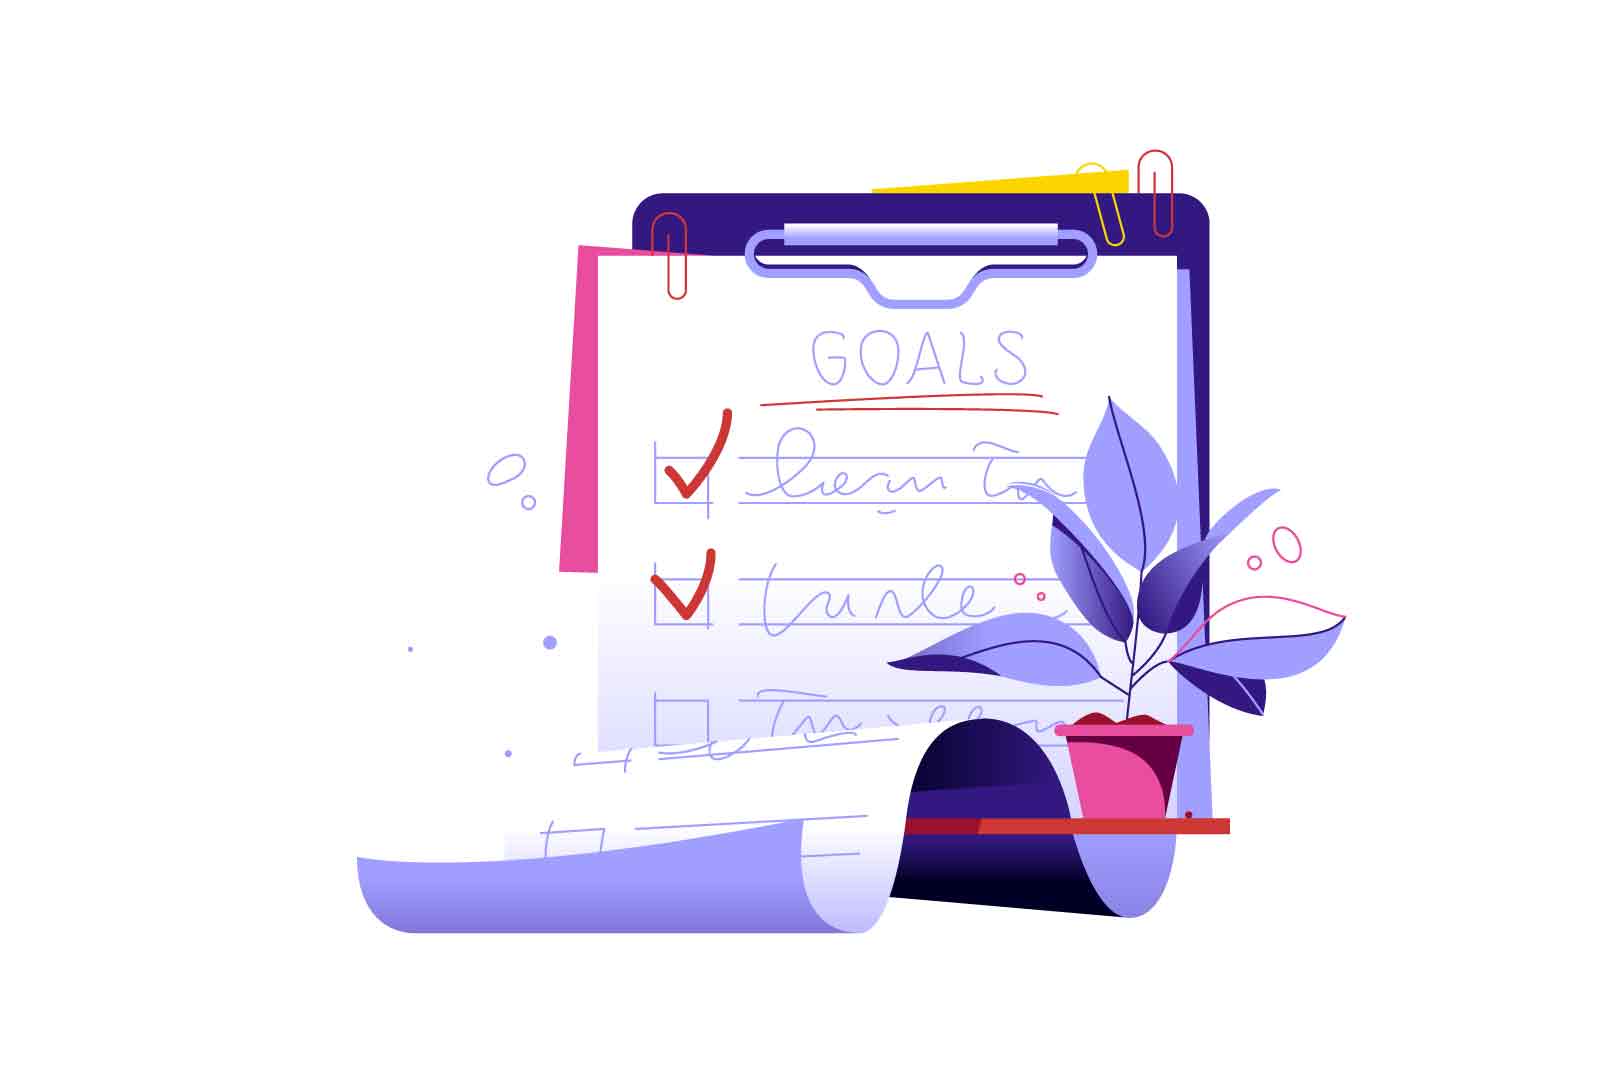 Goals or checklist, checkbox with red check marks vector illustration. Goal achievement and to do list flat style concept